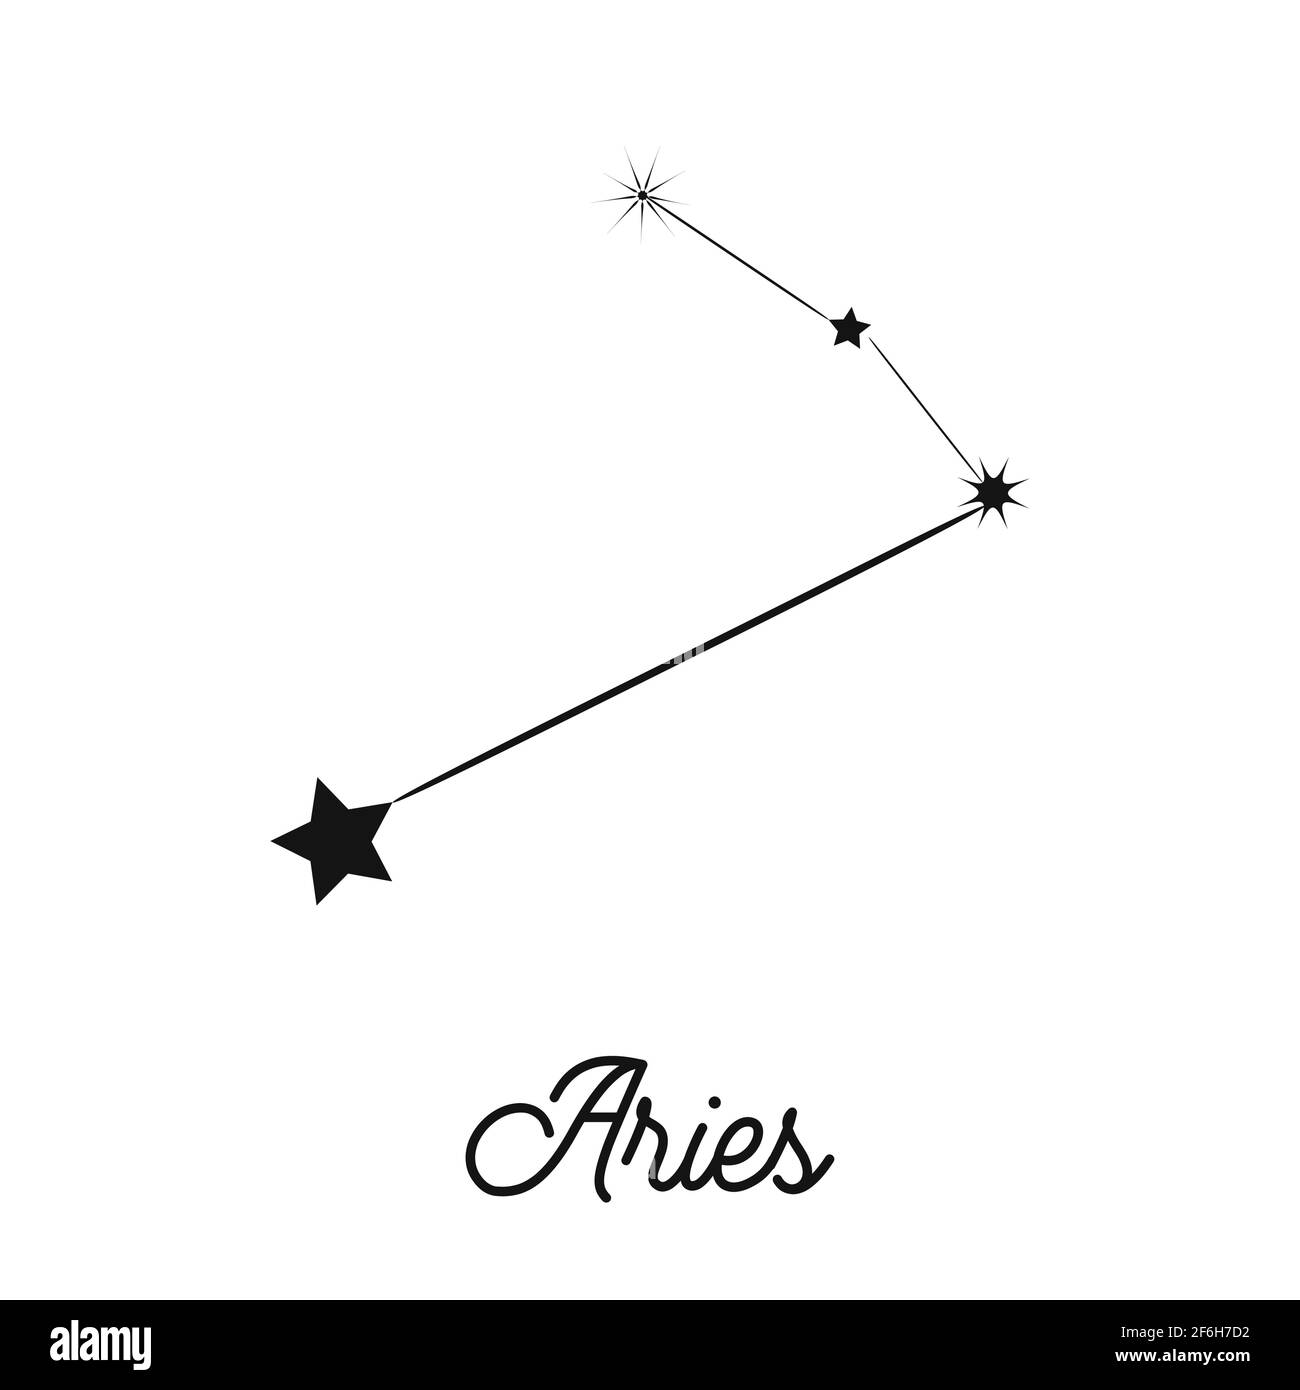 Zodiac sign in the form of a constellation in the sky. Stars and lines. Stock Vector